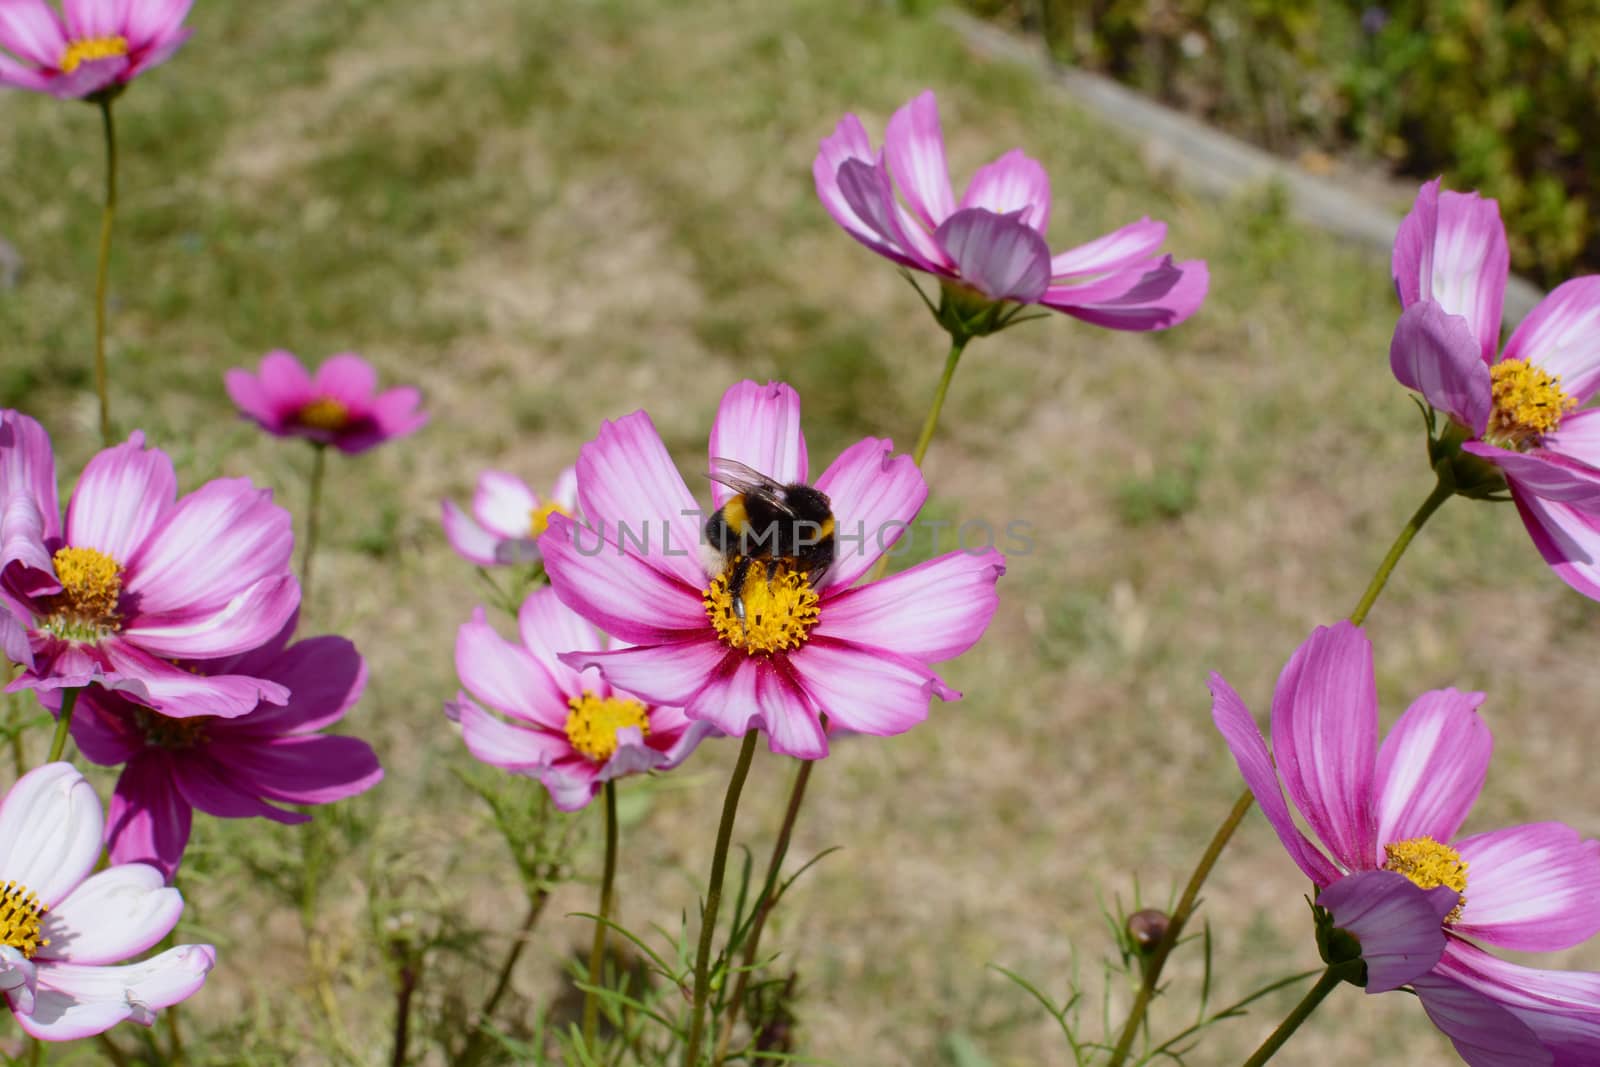 Bumblebee pollinating pink and white Cosmos Peppermint Rock flowers in a rural allotment garden